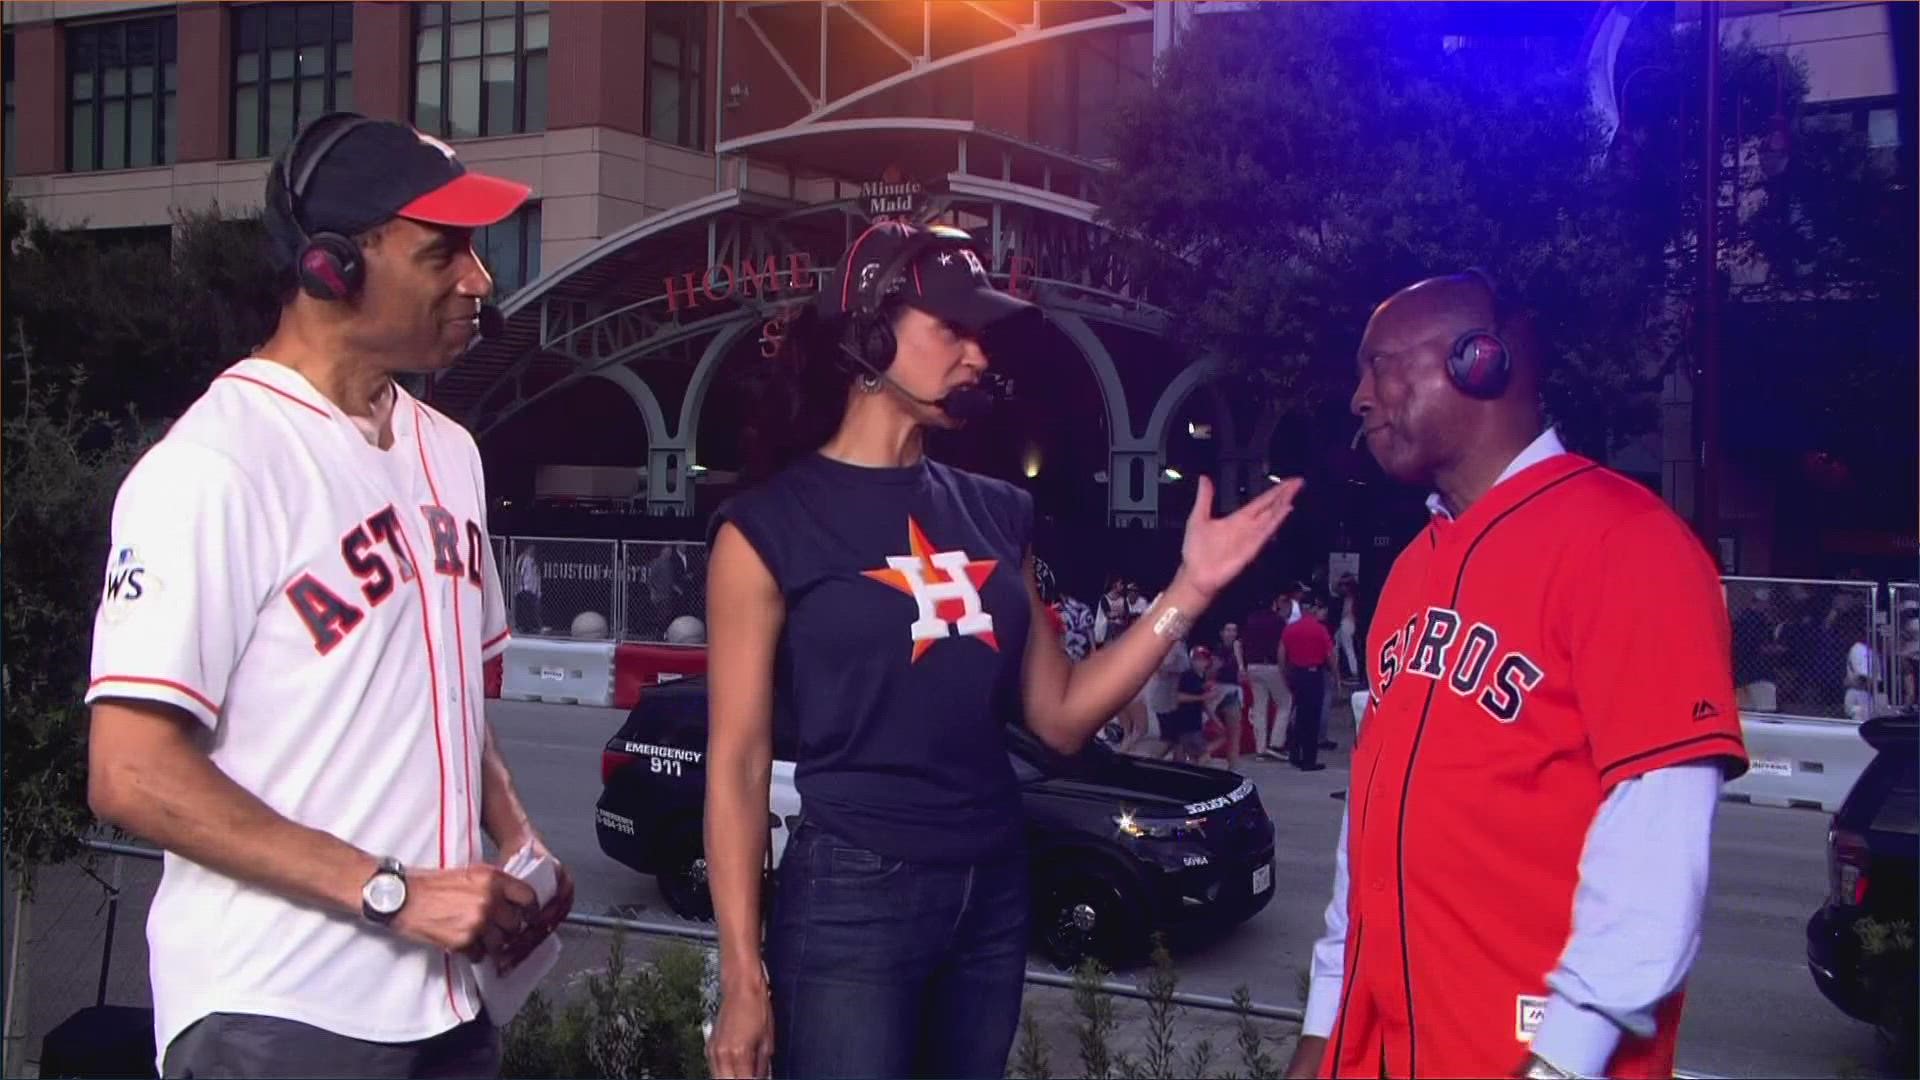 Mayor Turner joined Len Cannon and Mia Gradney on our stage outside Minute Maid Park and made his call on the series.